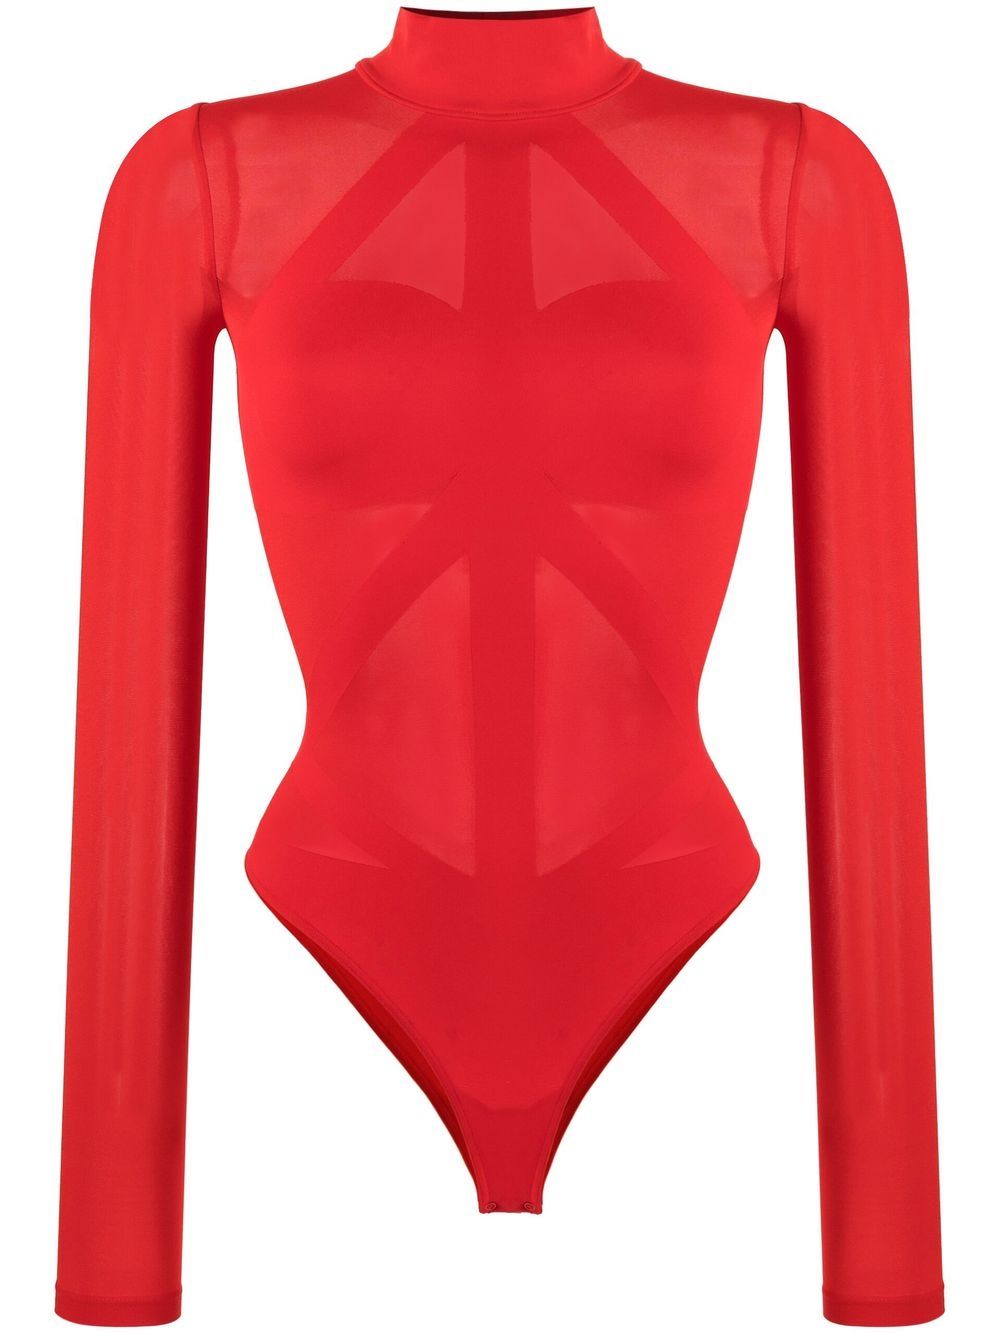 Wolford - Happy birthday to us 🎂 🥂! The Maia String Body, one of three  bodysuits, inspired by the Archive, celebrating our 70th anniversary, is a  real stunner. 😎 Worn here by